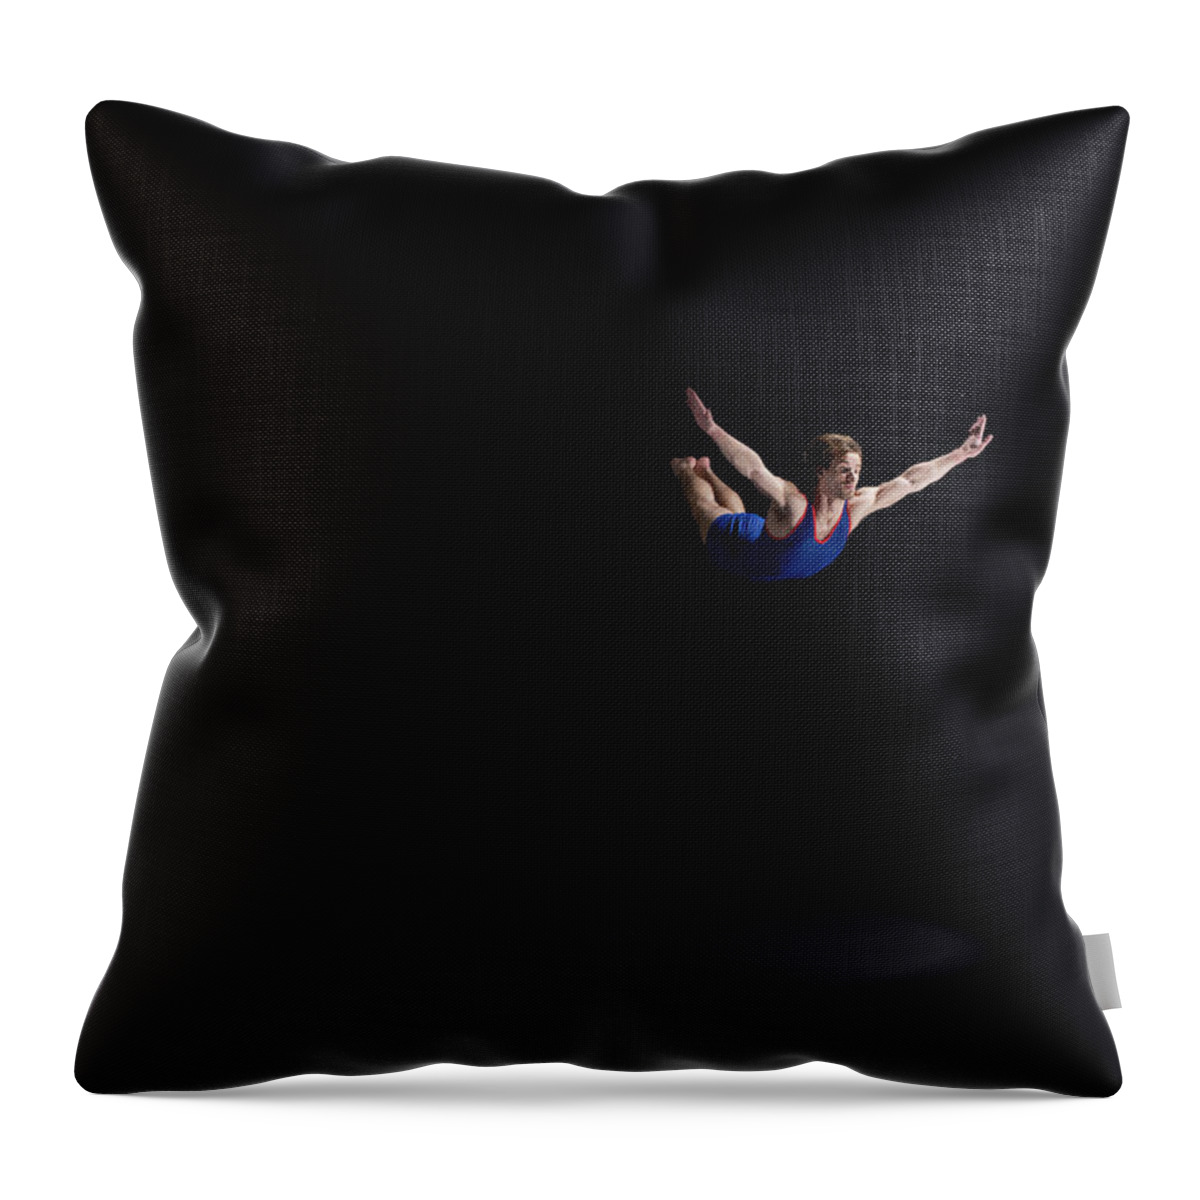 Expertise Throw Pillow featuring the photograph Male Gymnast Soaring Through The Air by Mike Harrington